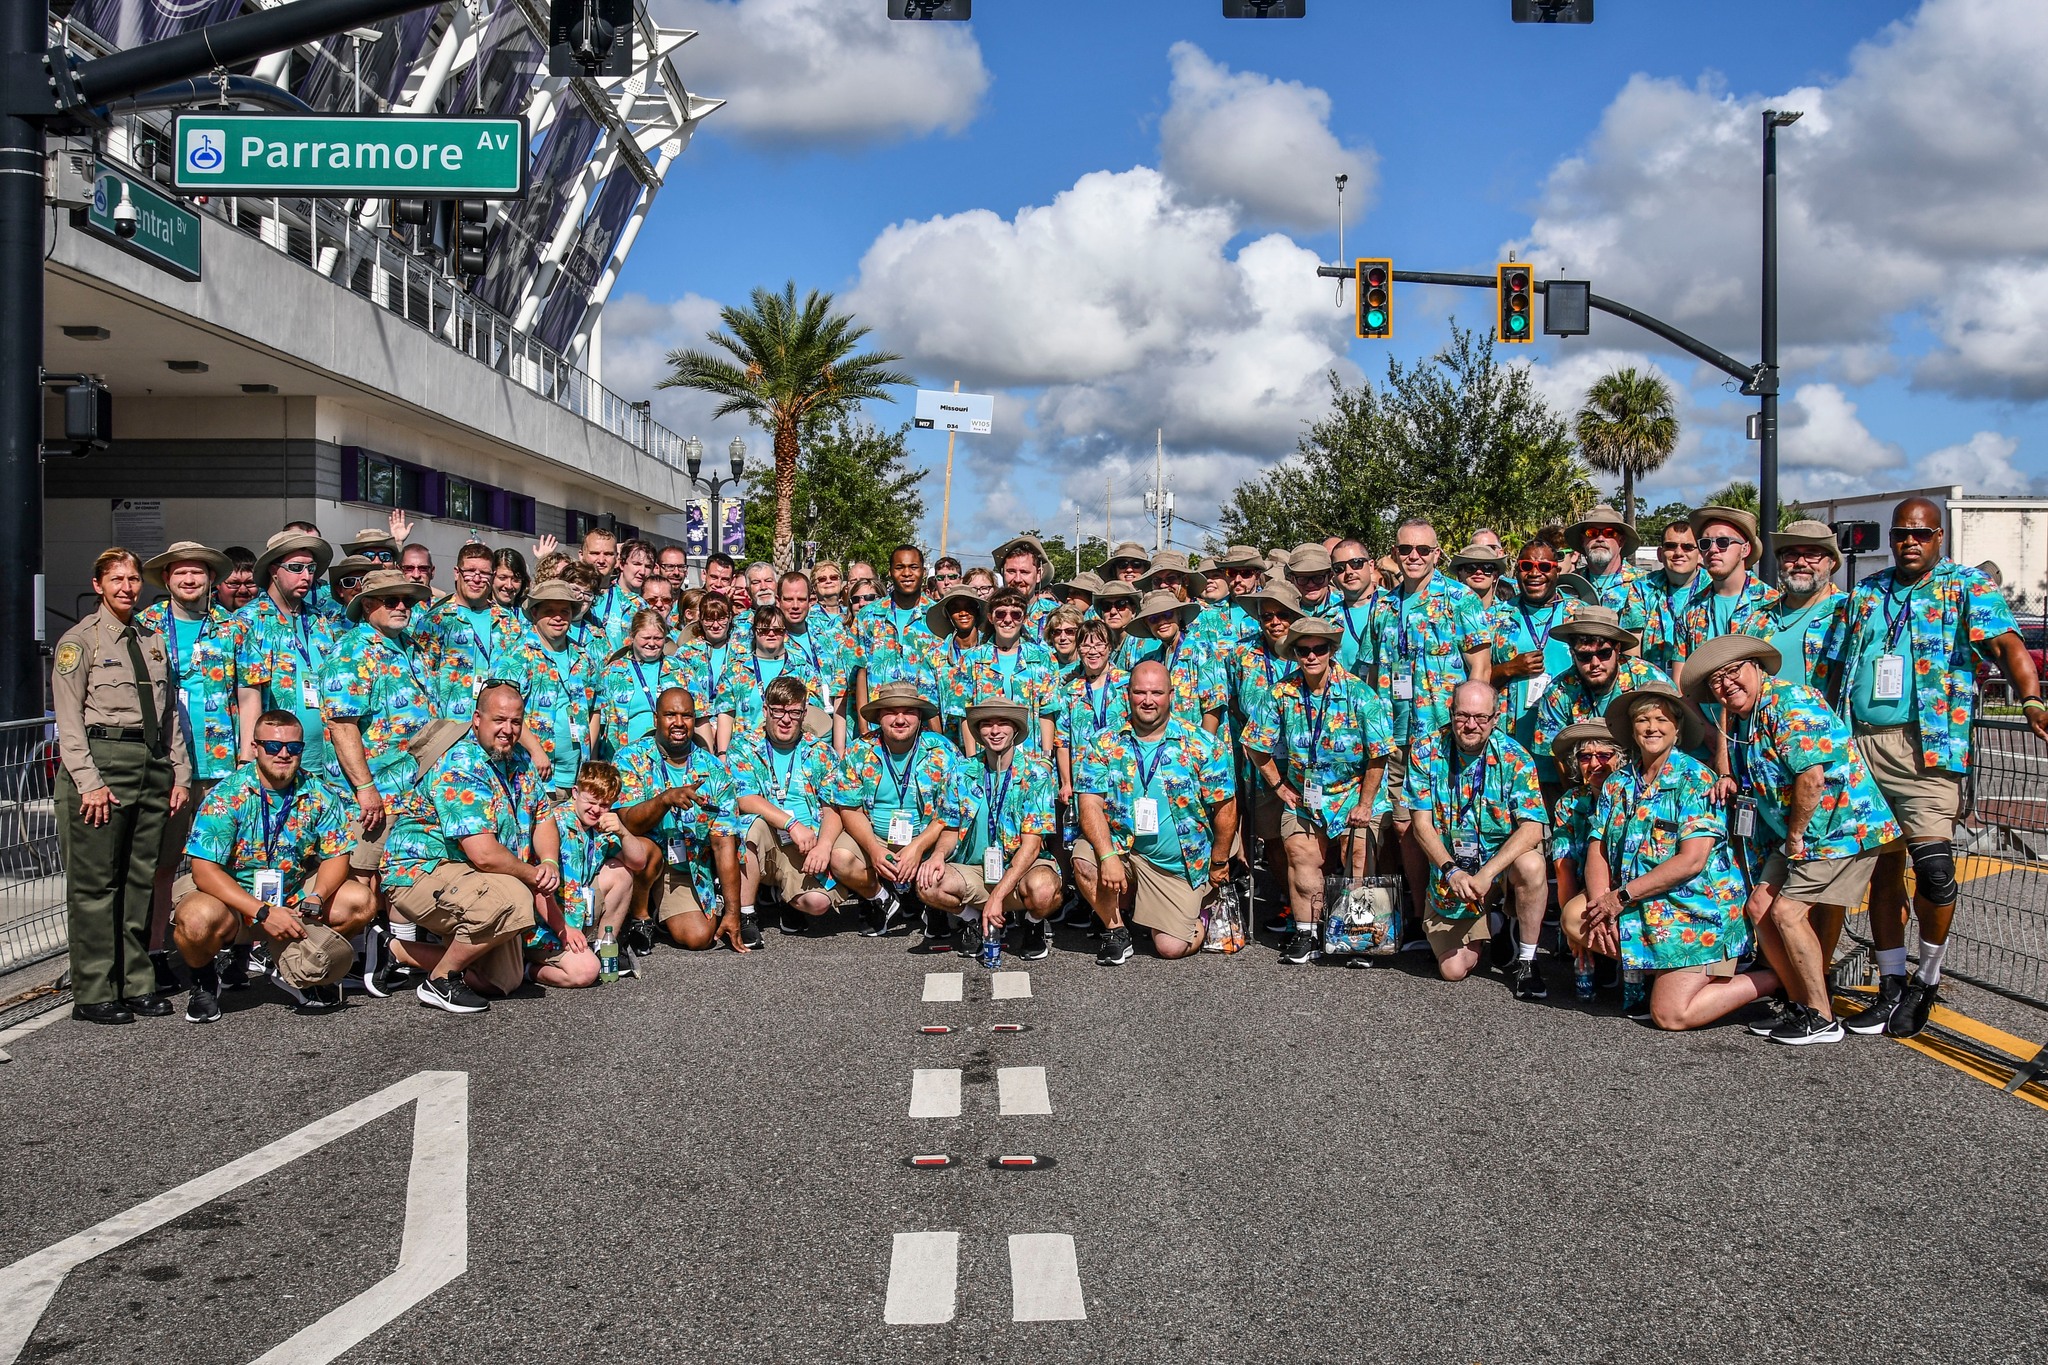 Team Missouri poses for a picture outside of Exploria Stadium in Orlando, Fla. ahead of the 2022 USA Games Opening Ceremonies on Sunday, June 5, 2022.